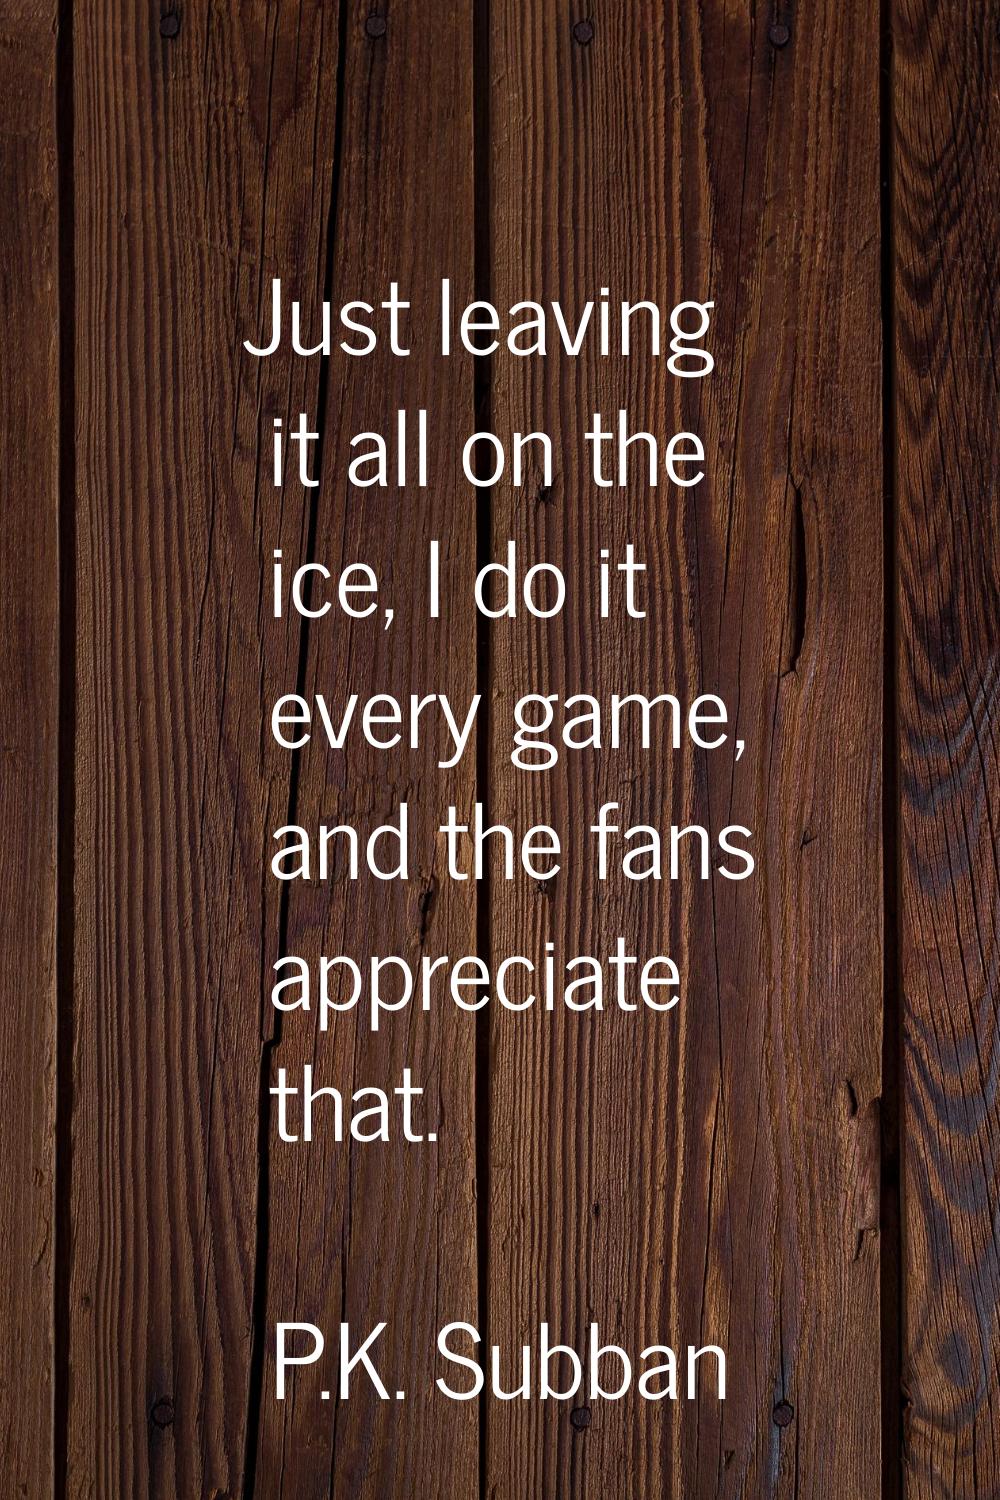 Just leaving it all on the ice, I do it every game, and the fans appreciate that.